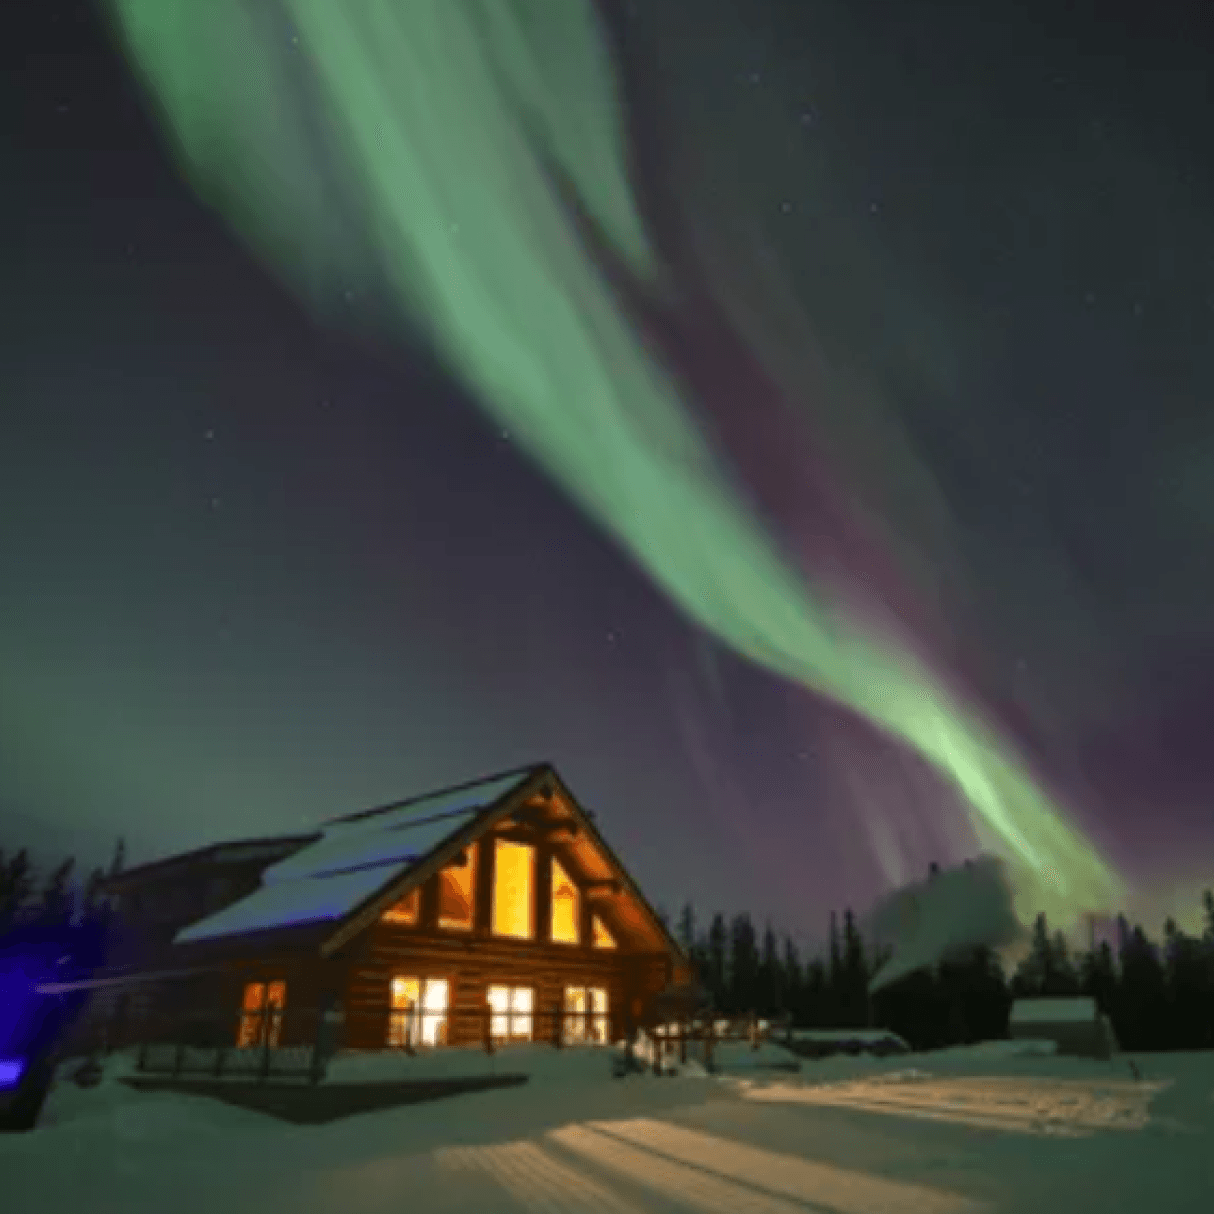 A wooden cabin's windows glow orange in the night. Beside the cabin is a pool. Above, in the night sky, are green northern lights.